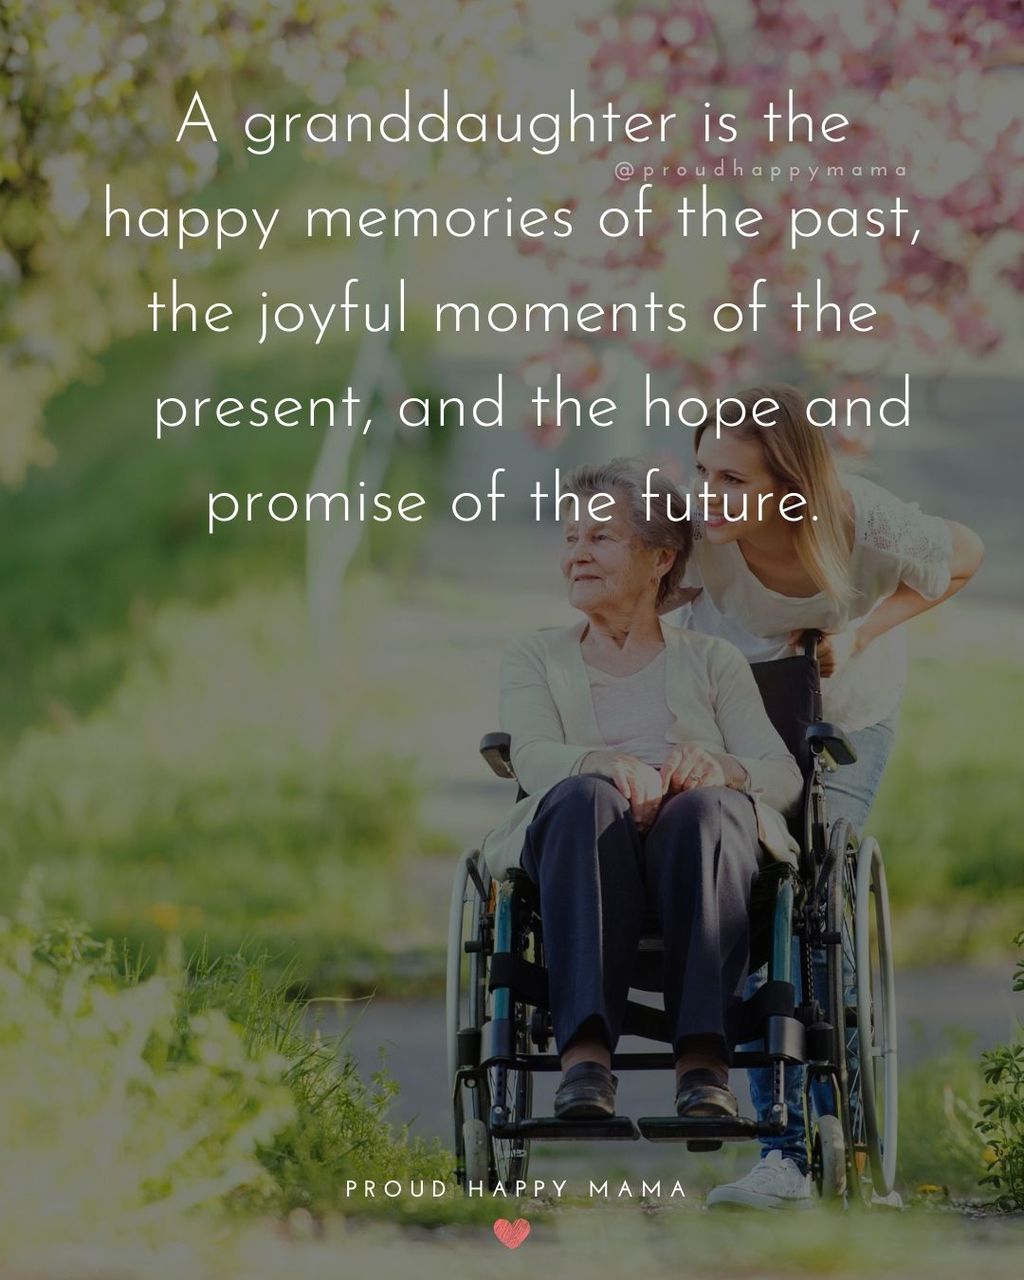 Granddaughter pushing elderly grandmother in wheelchair outdoors, with text overlay, ‘A granddaughter is the happy memories of the past, the joyful moments of the present, and the hope and promise of the future.’